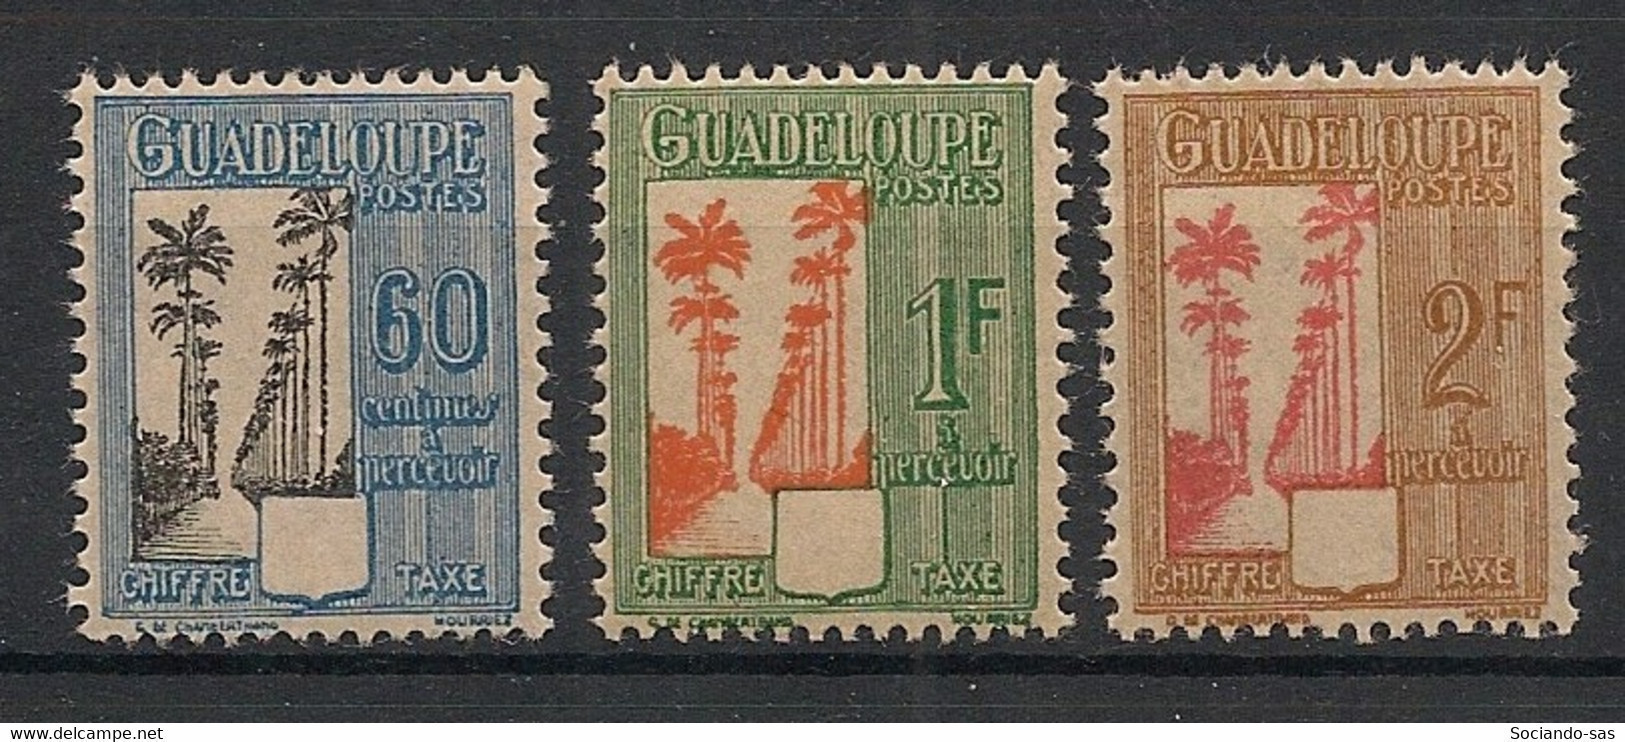 GUADELOUPE - 1944 - Taxe TT N°Yv. 38 à 40 - Série Complète - Neuf Luxe ** / MNH / Postfrisch - Timbres-taxe